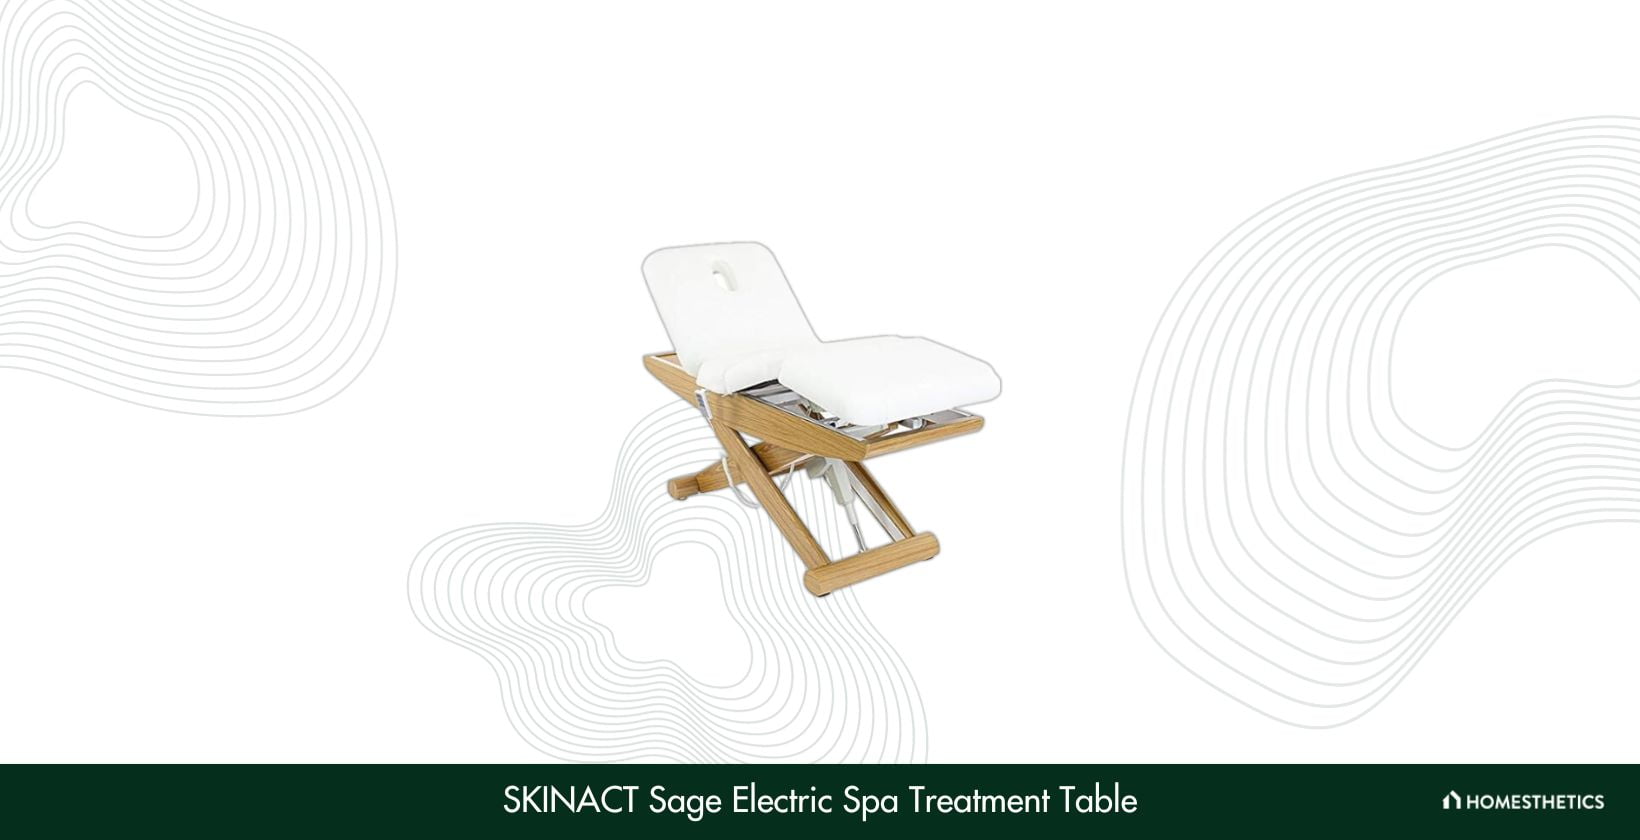 SKINACT Sage Electric Spa Treatment Table